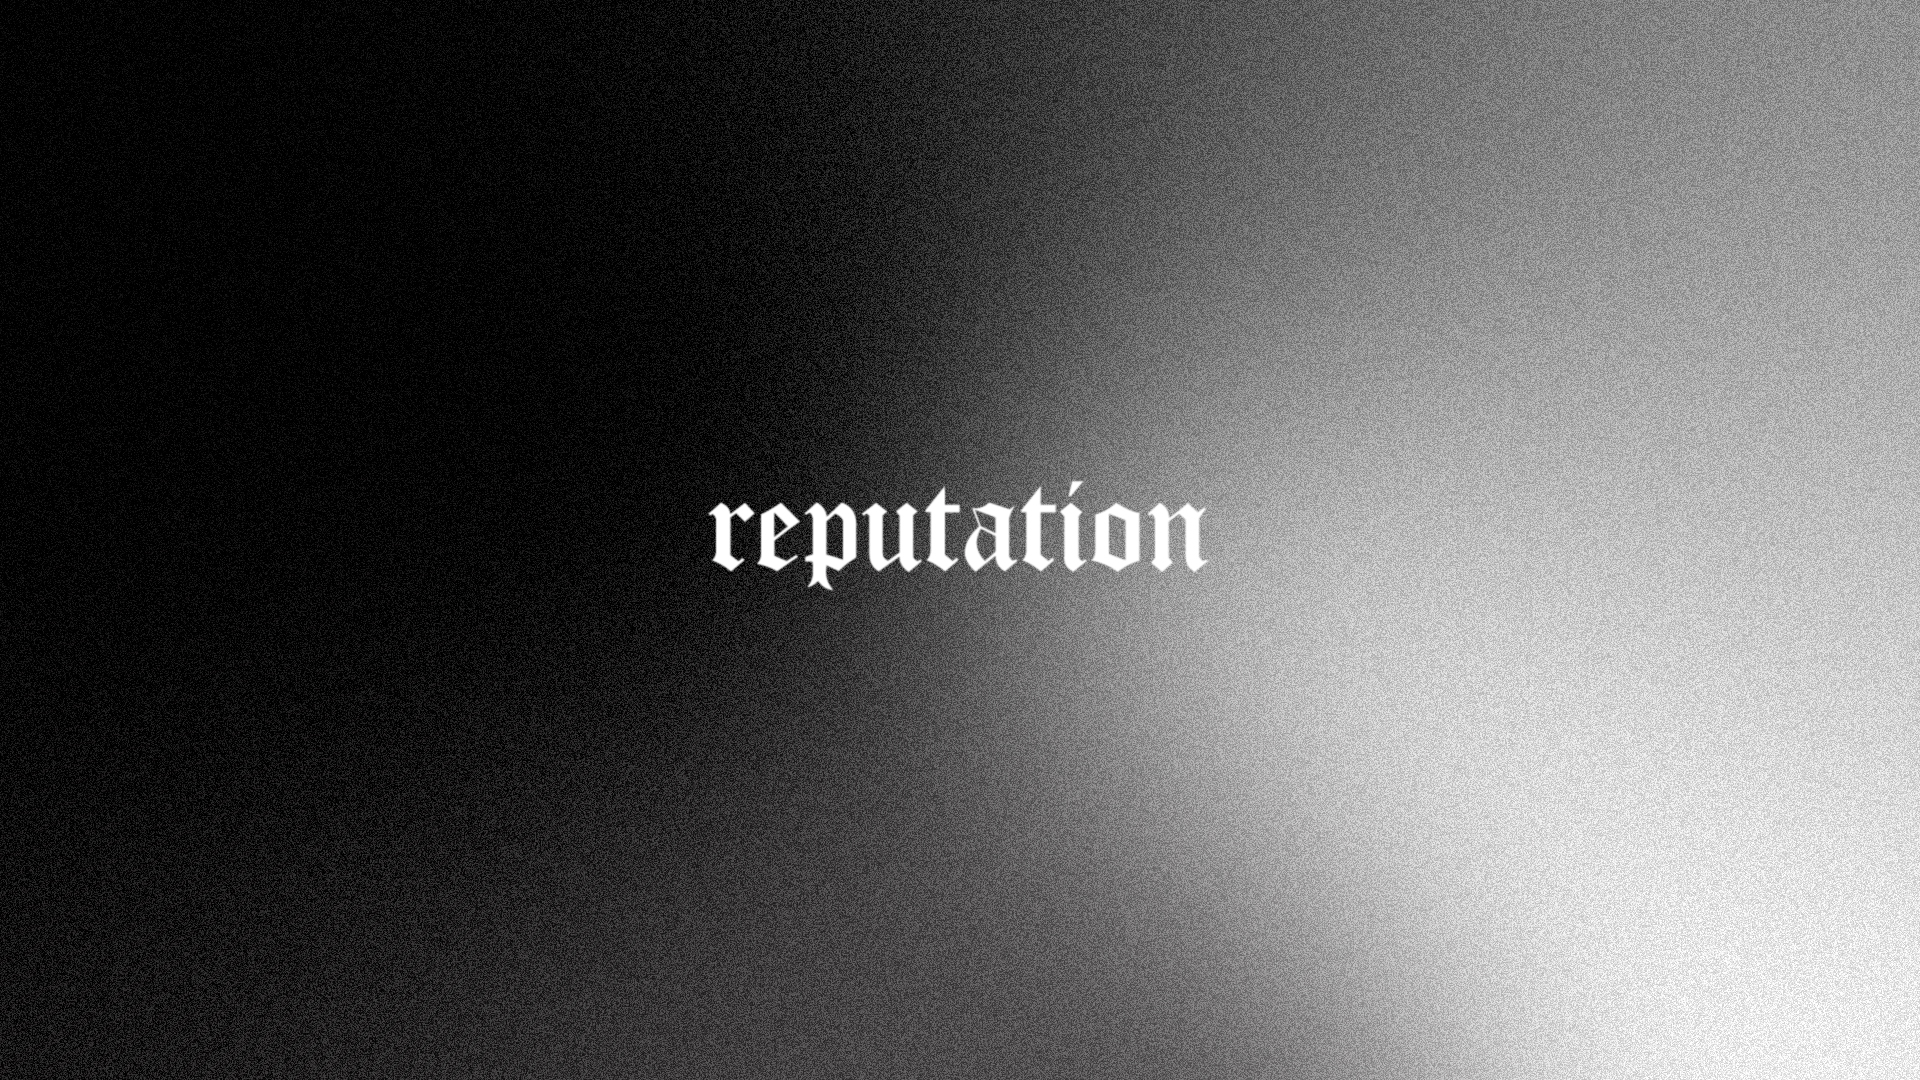 Reputation by taylor swift wallpaper by lucerolh on